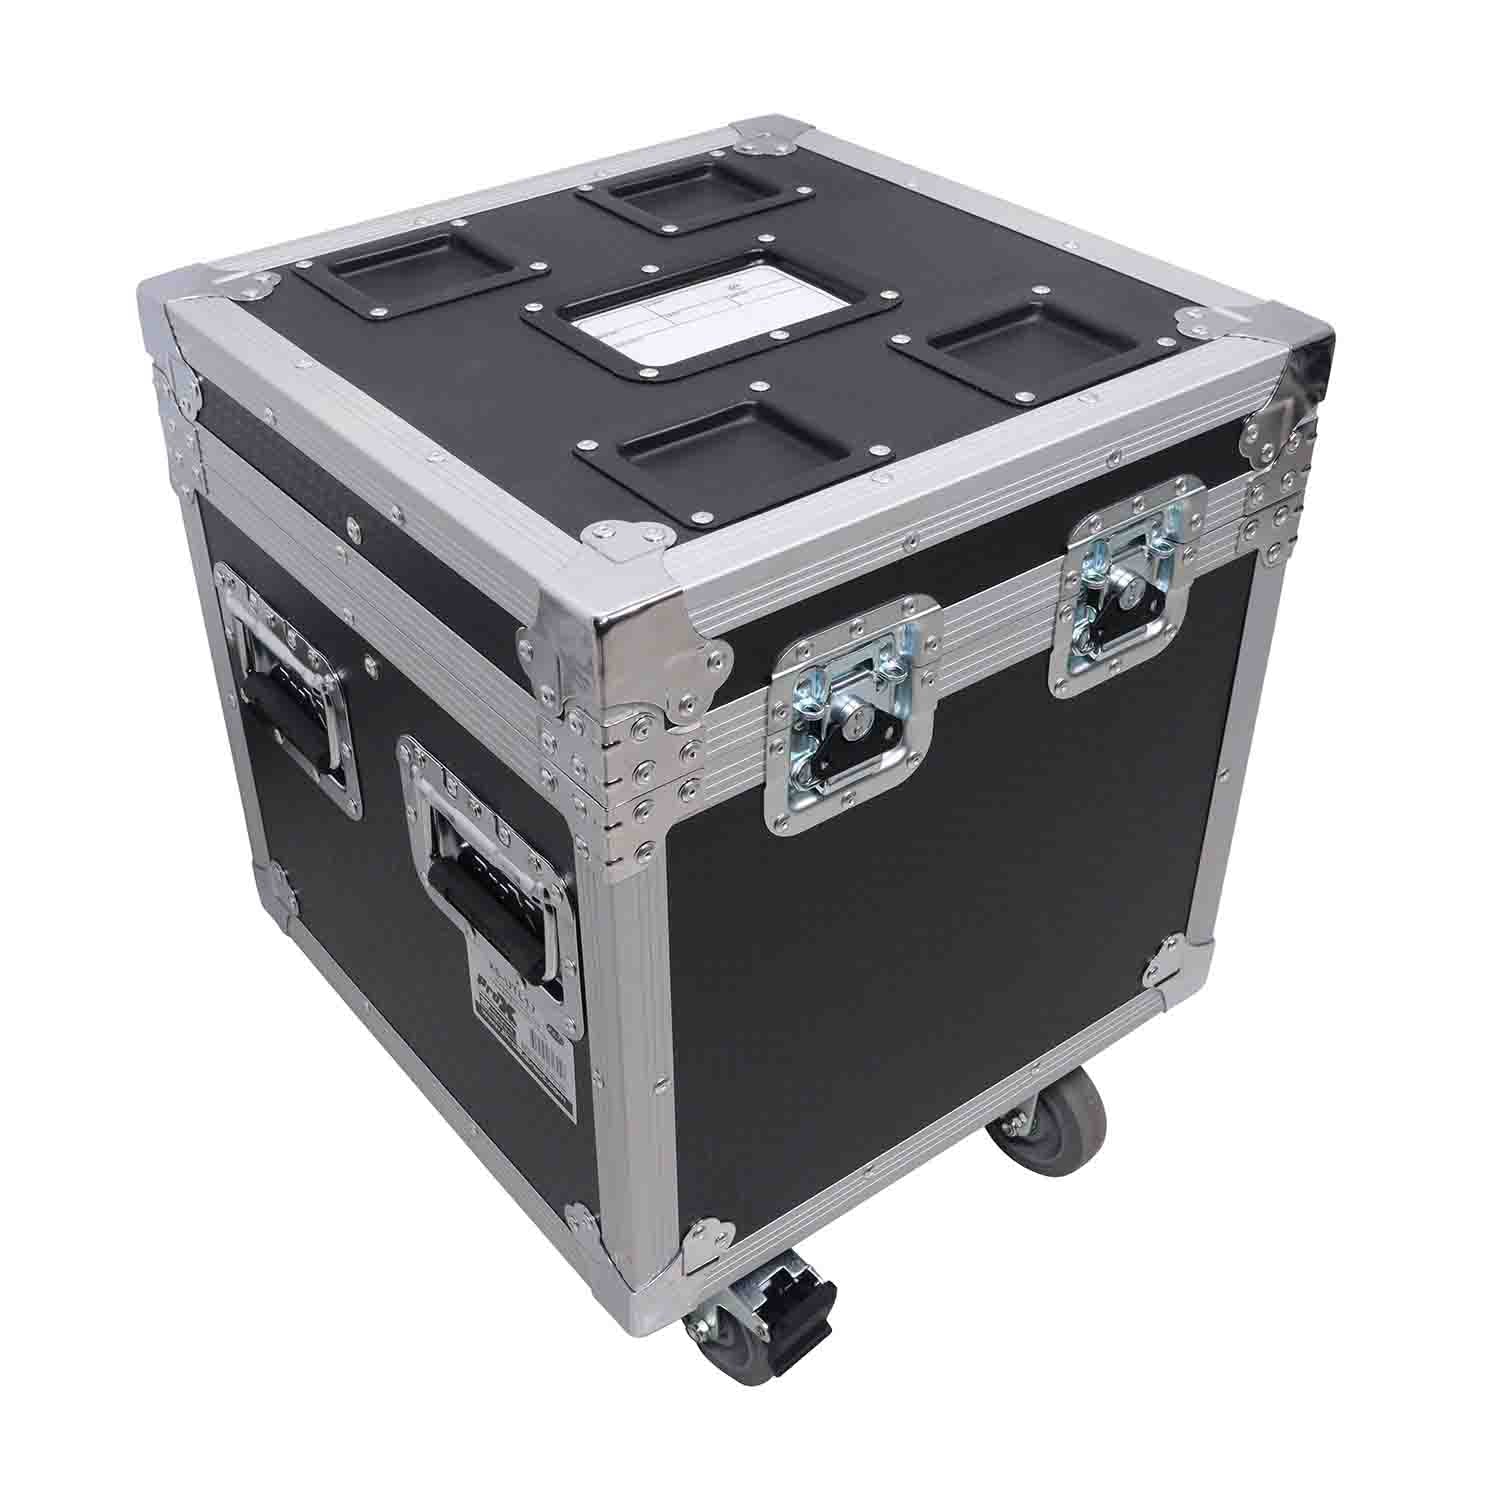 ProX XS-UTL17 ATA Utility Flight Travel Heavy-Duty Storage Road Case with 4-Inch in casters – 18"x18"x18' Exterior - Hollywood DJ